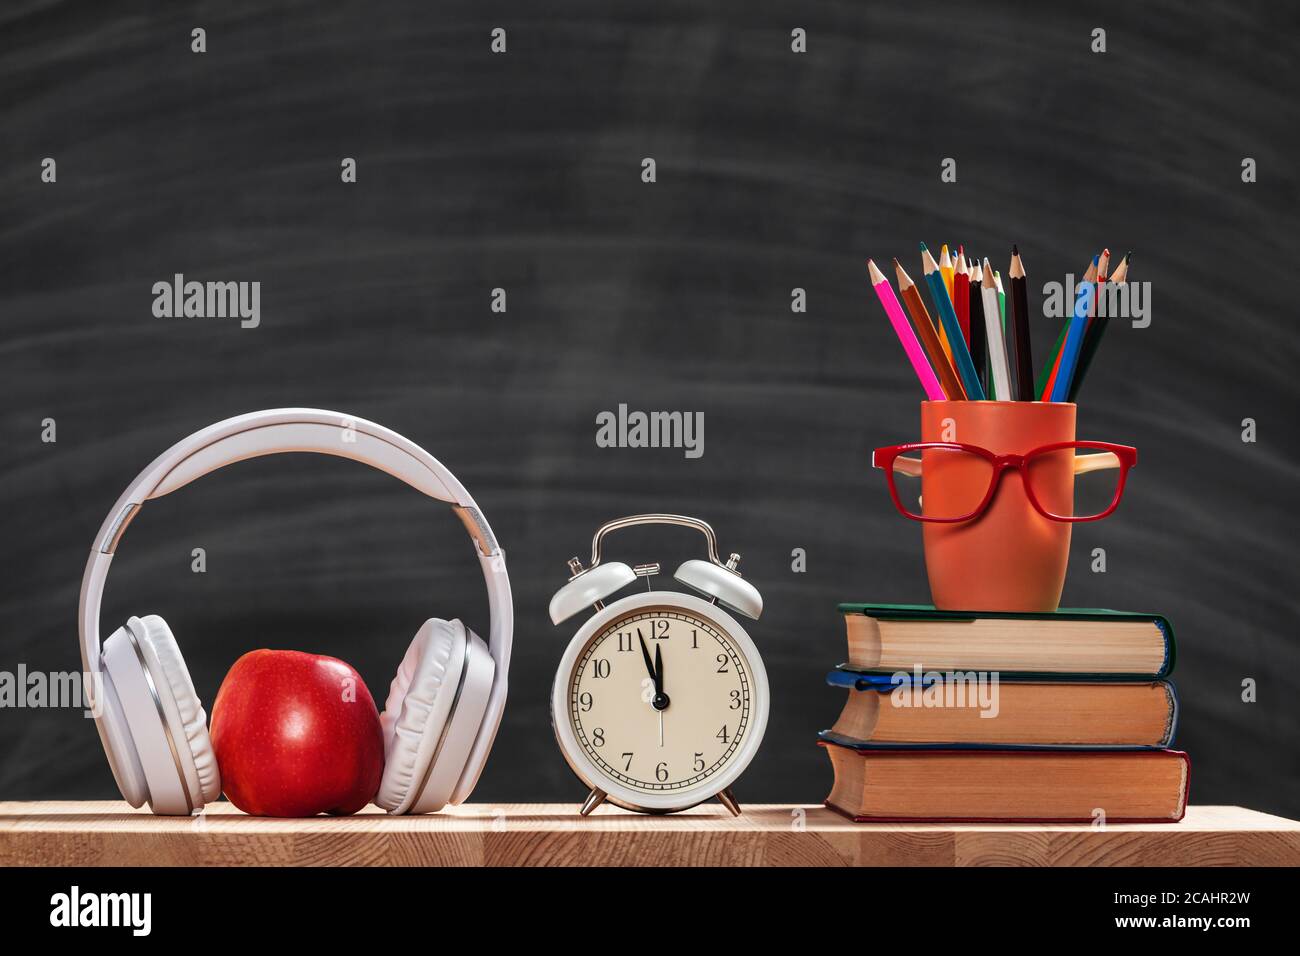 Back to school. Student set. Stack of books pencils glasses alarm clock headphones apple on the background of the black board. Education concept. Stock Photo